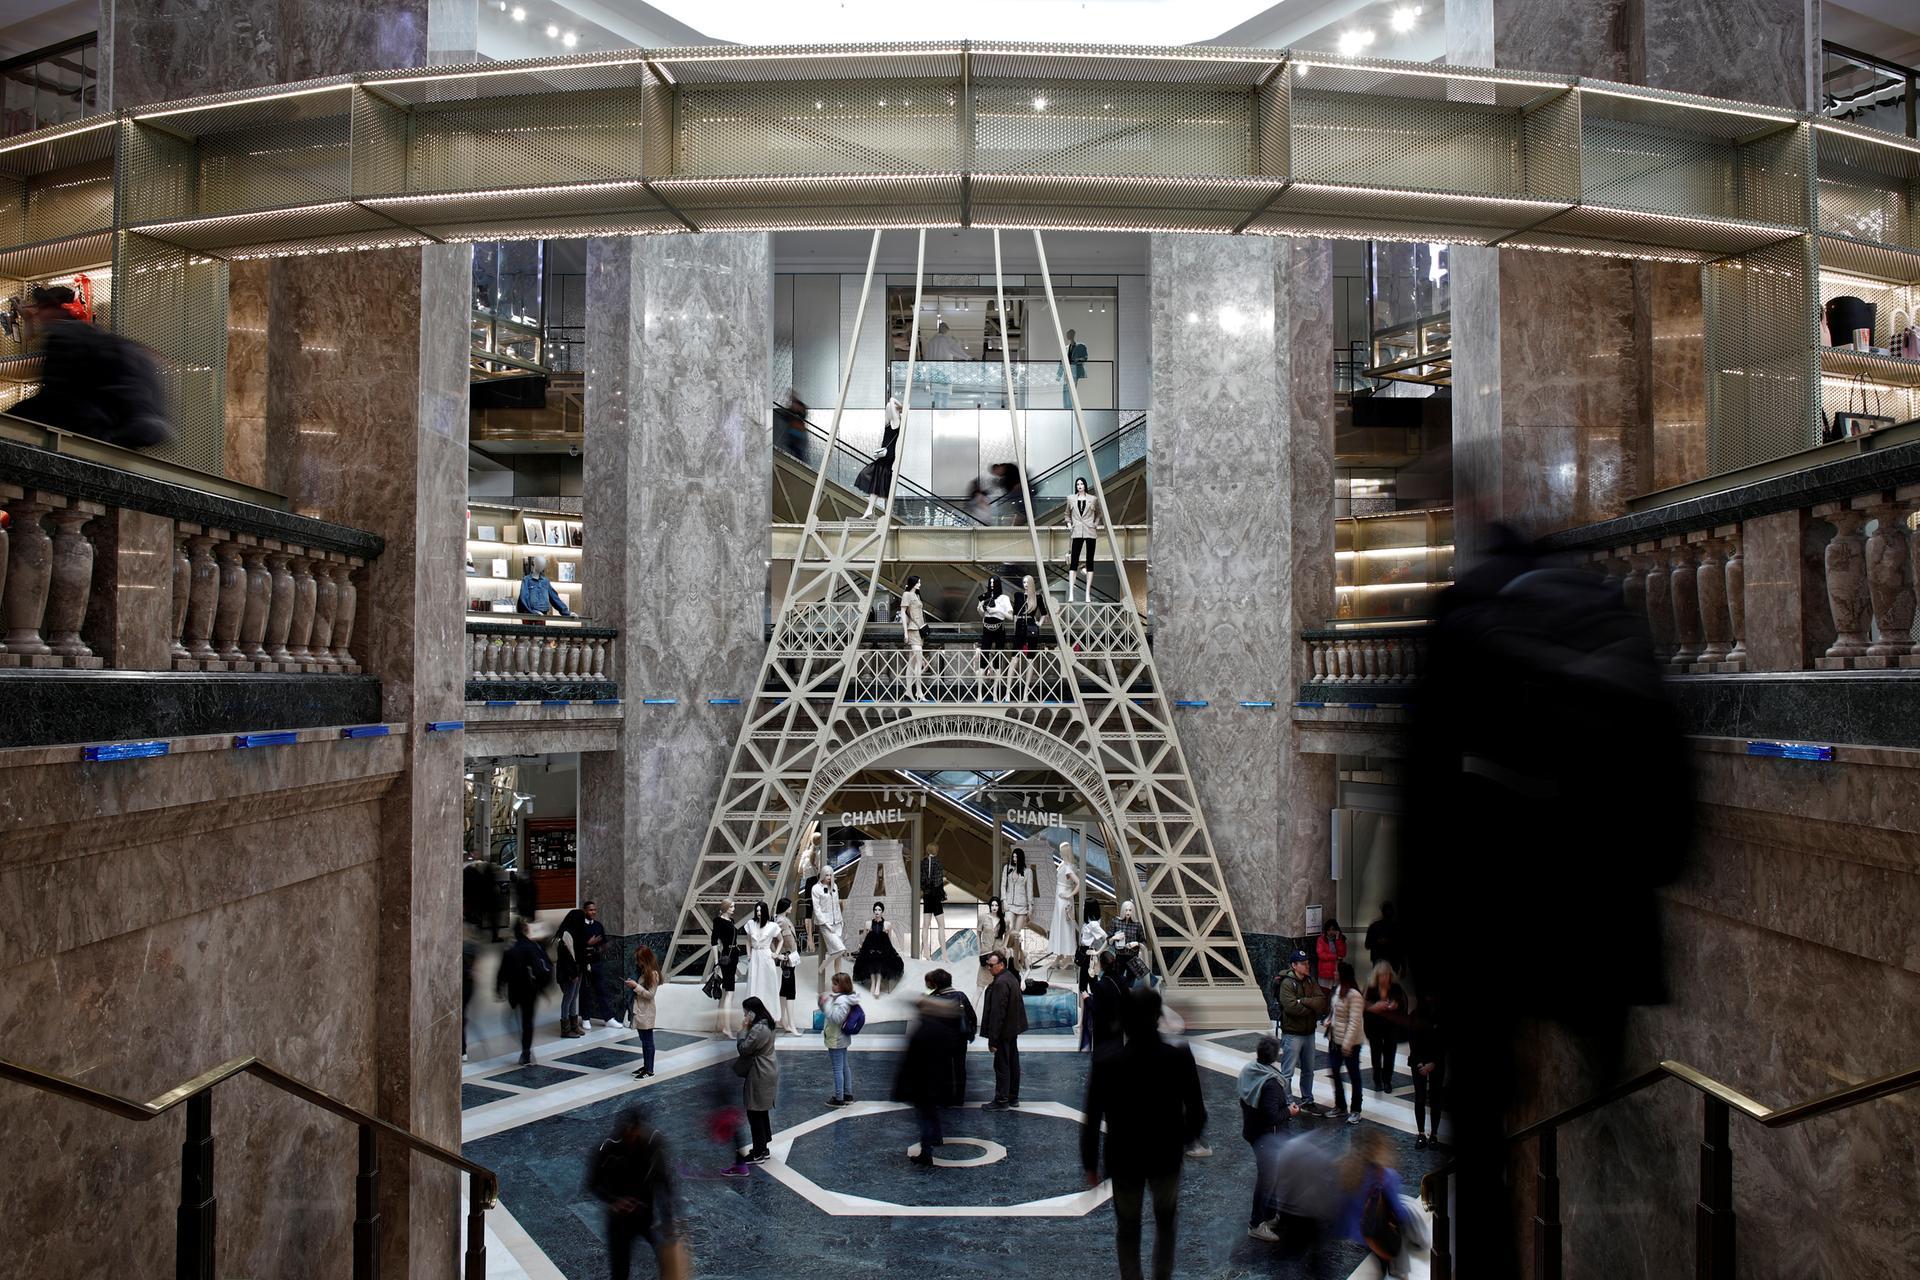 Millennials are falling in love with Galeries Lafayette